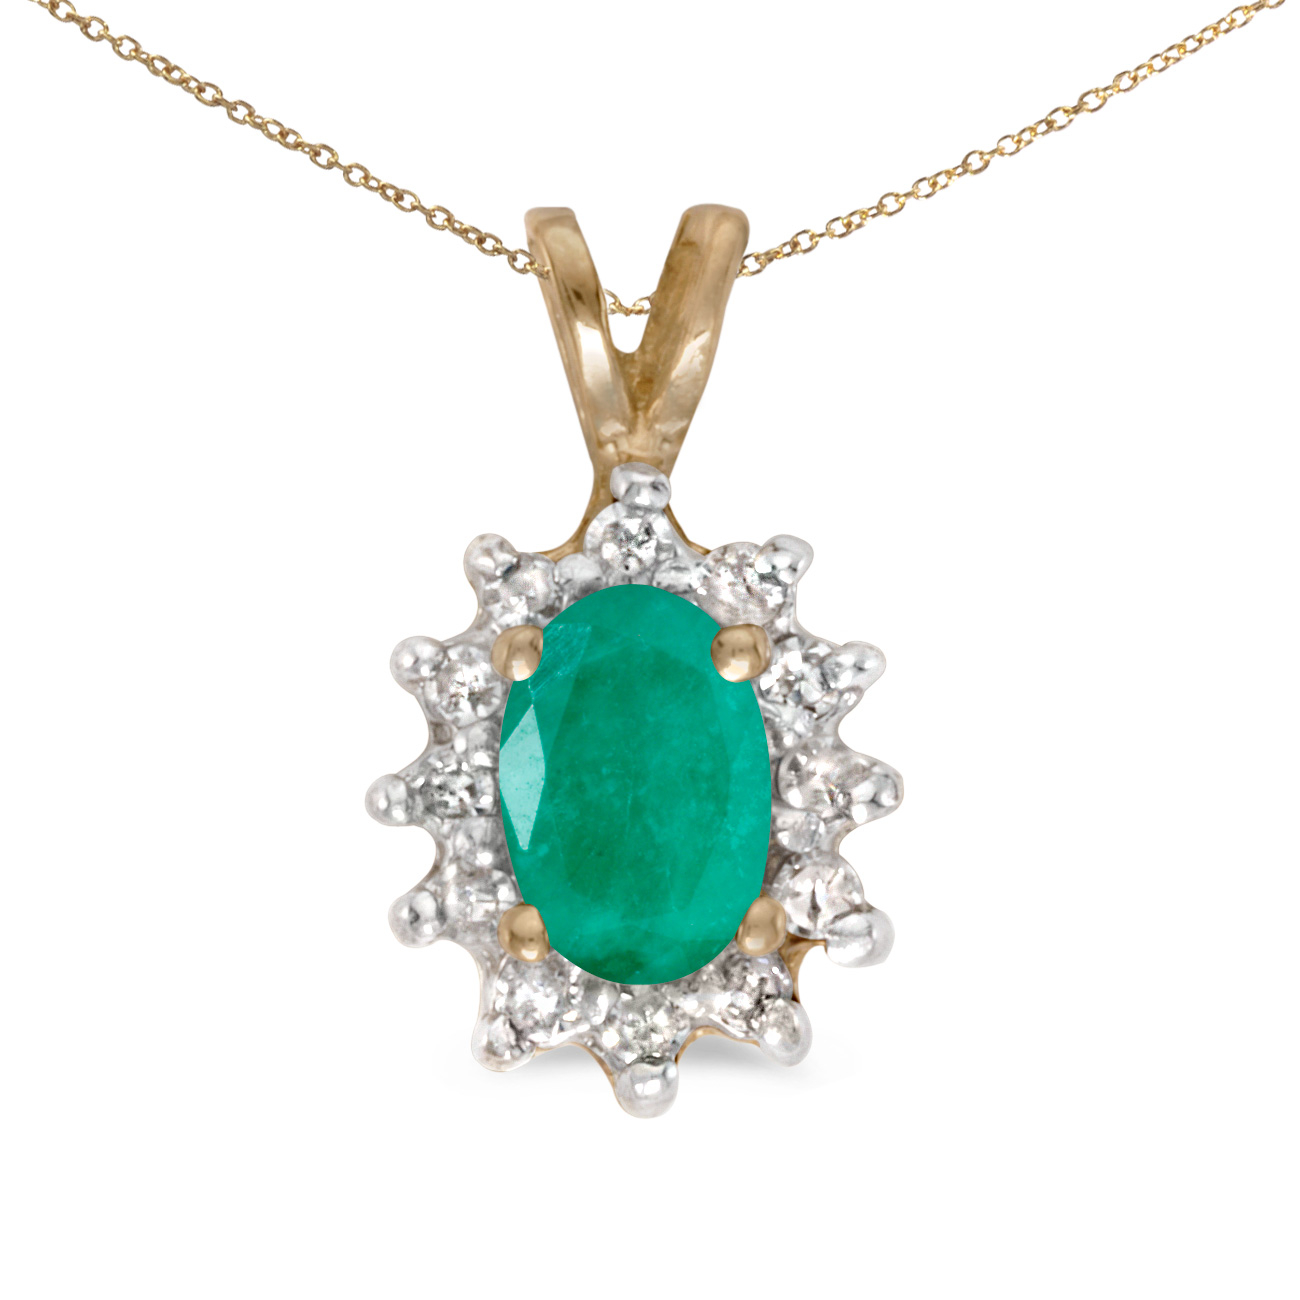 This 14k yellow gold oval emerald and diamond pendant features a 6x4 mm genuine natural emerald w...